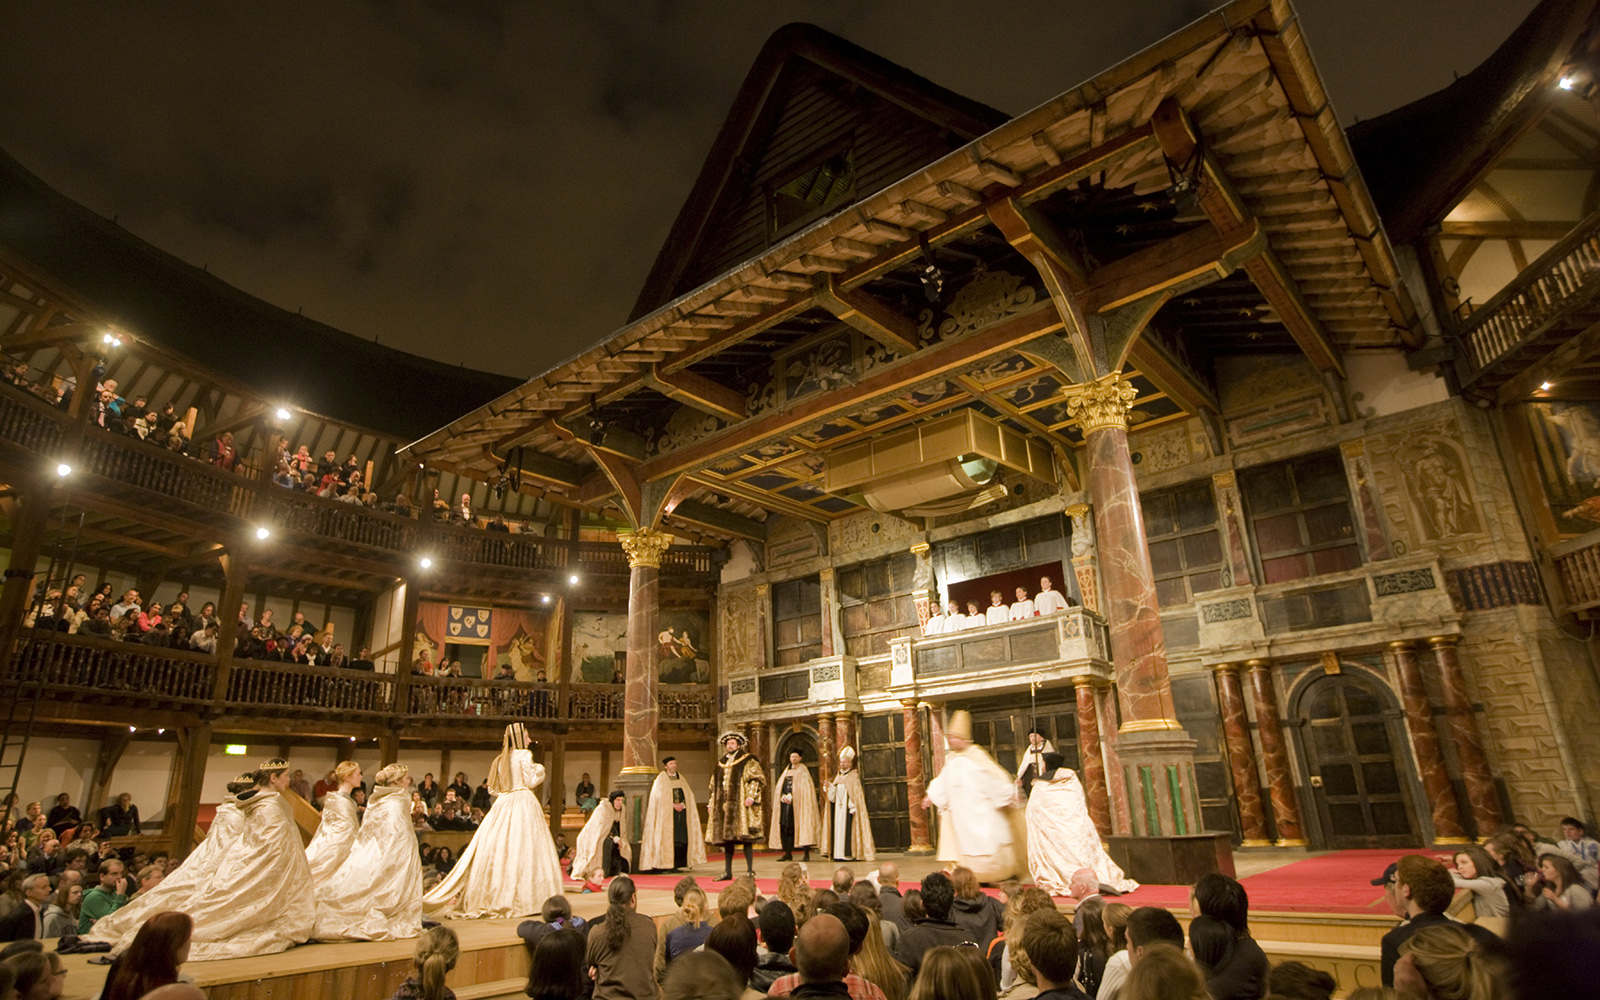 The Globe Theatre at night, cast in a golden glow. A procession of characters make their way up an extended catwalk to the Globe stage, as audiences watch on.